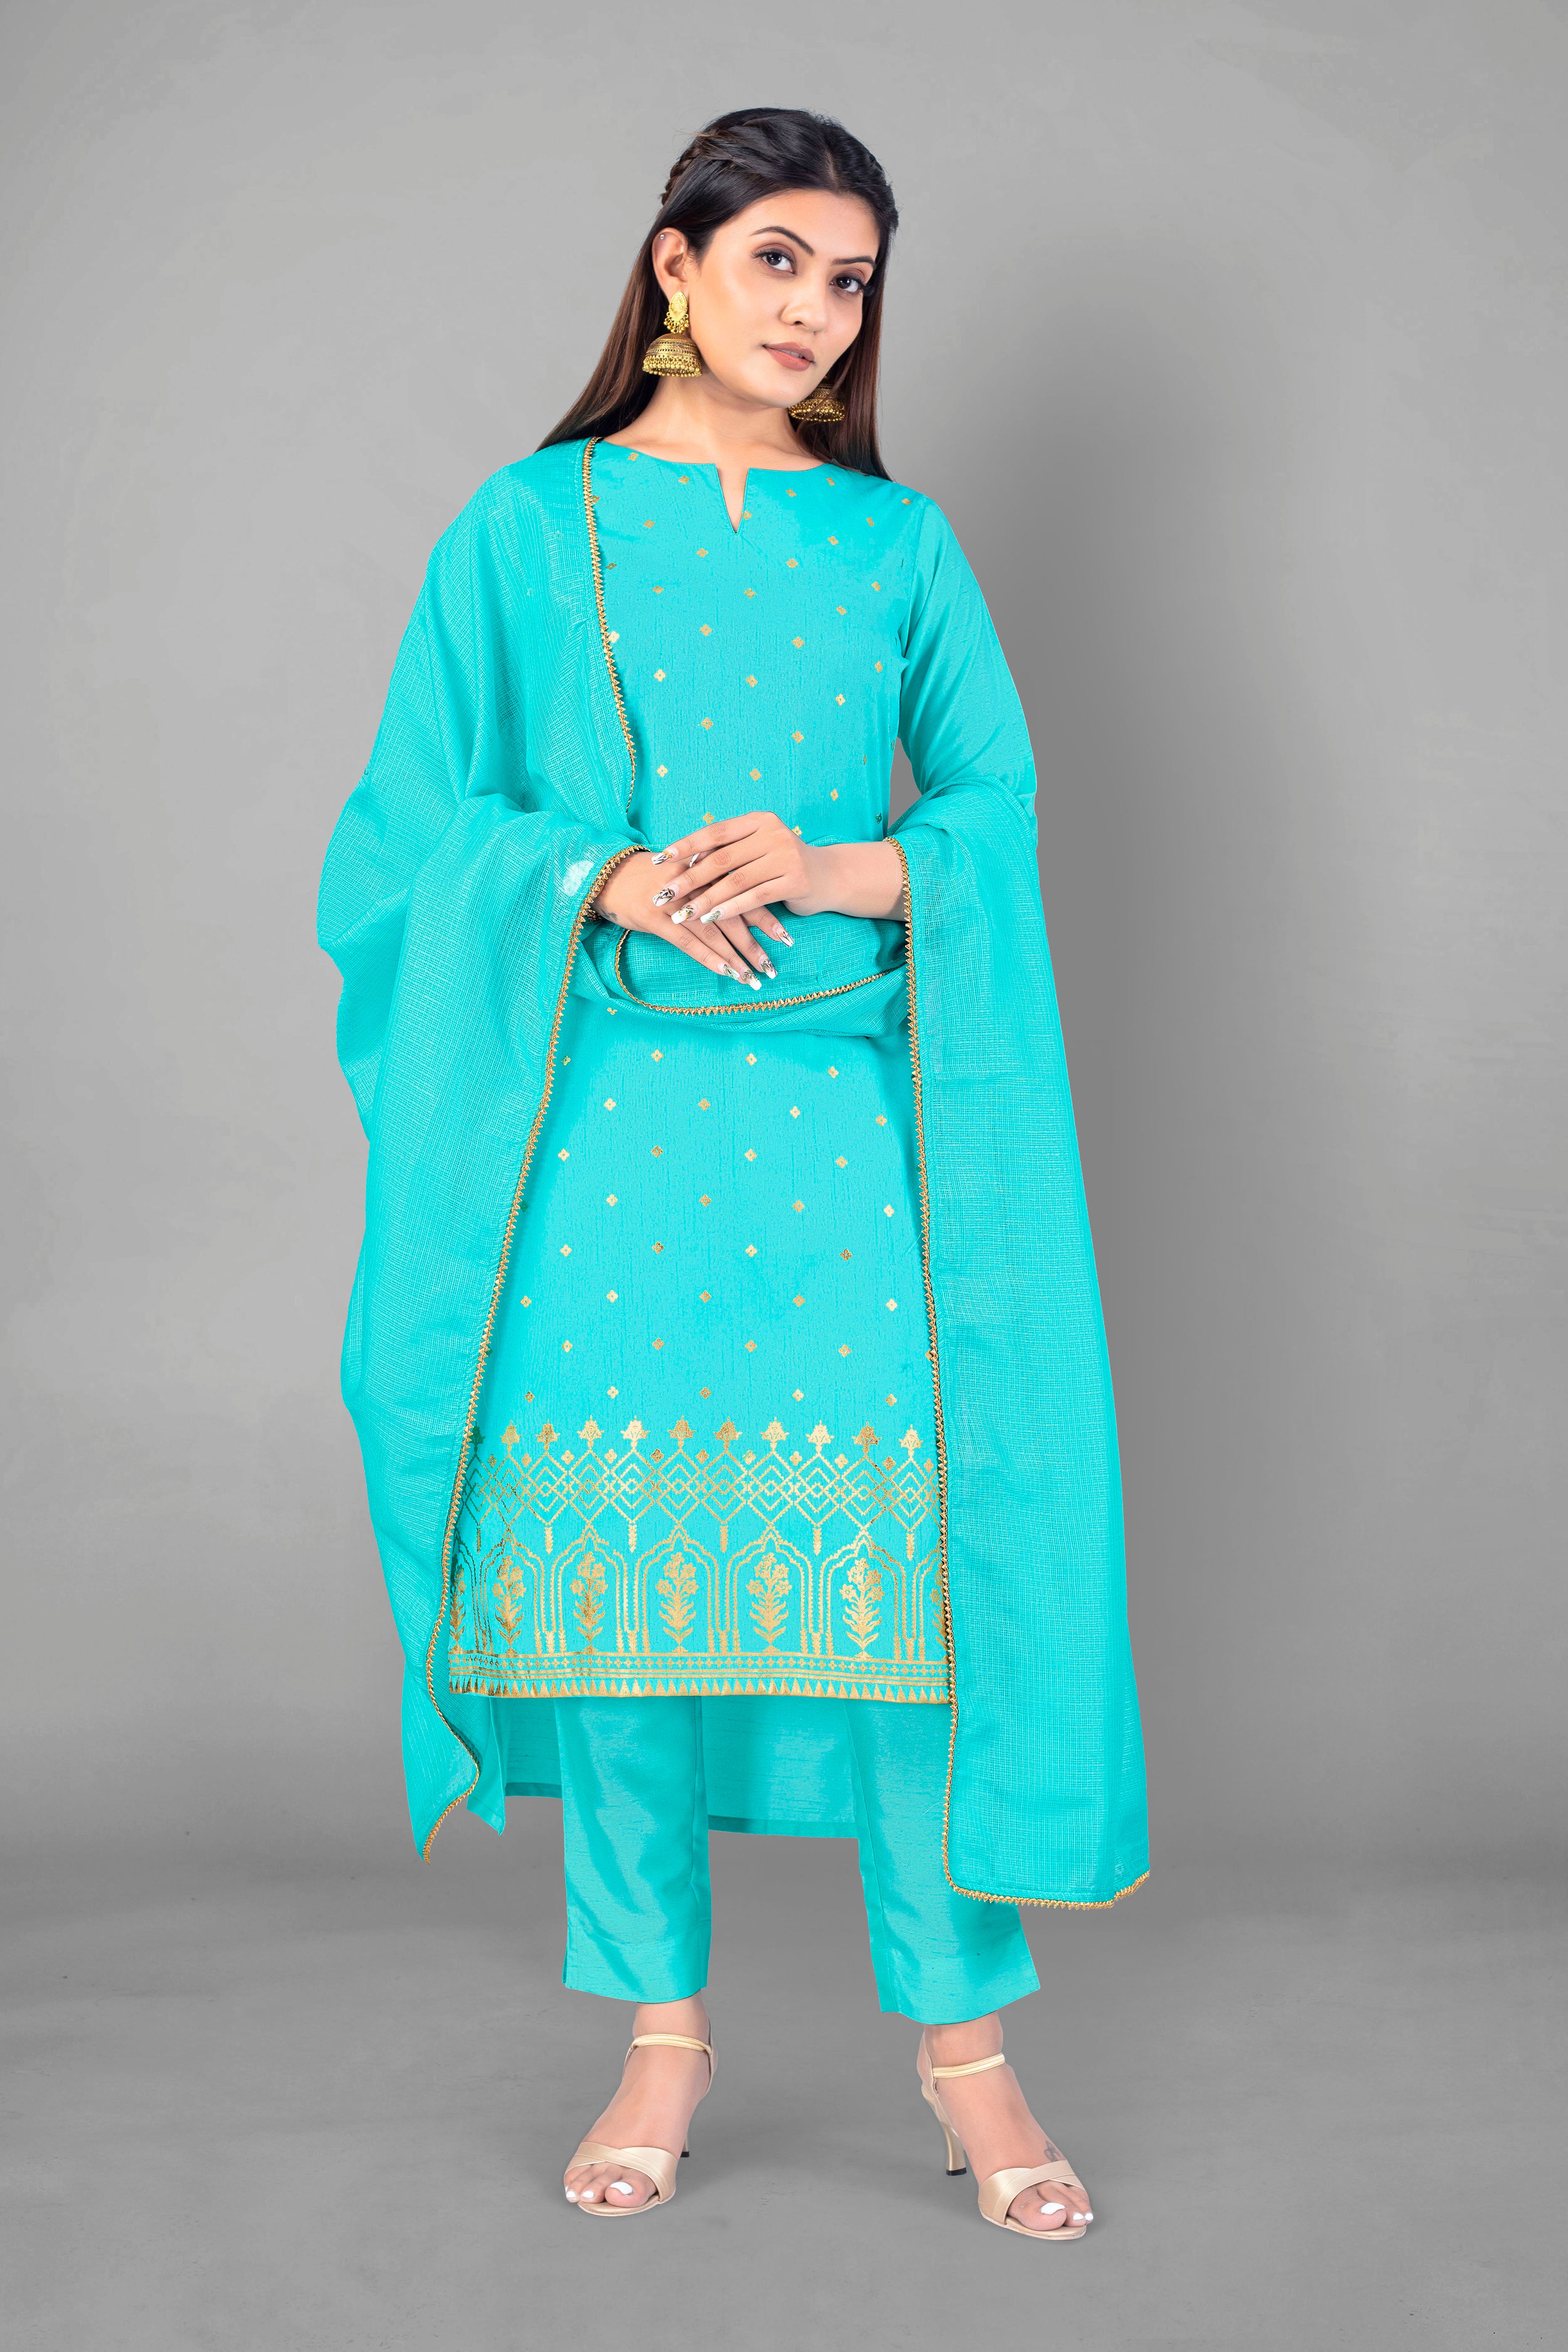 Sky-Blue Salwar Kameez with All-Over Floral Embroidery and Sequins | Exotic  India Art